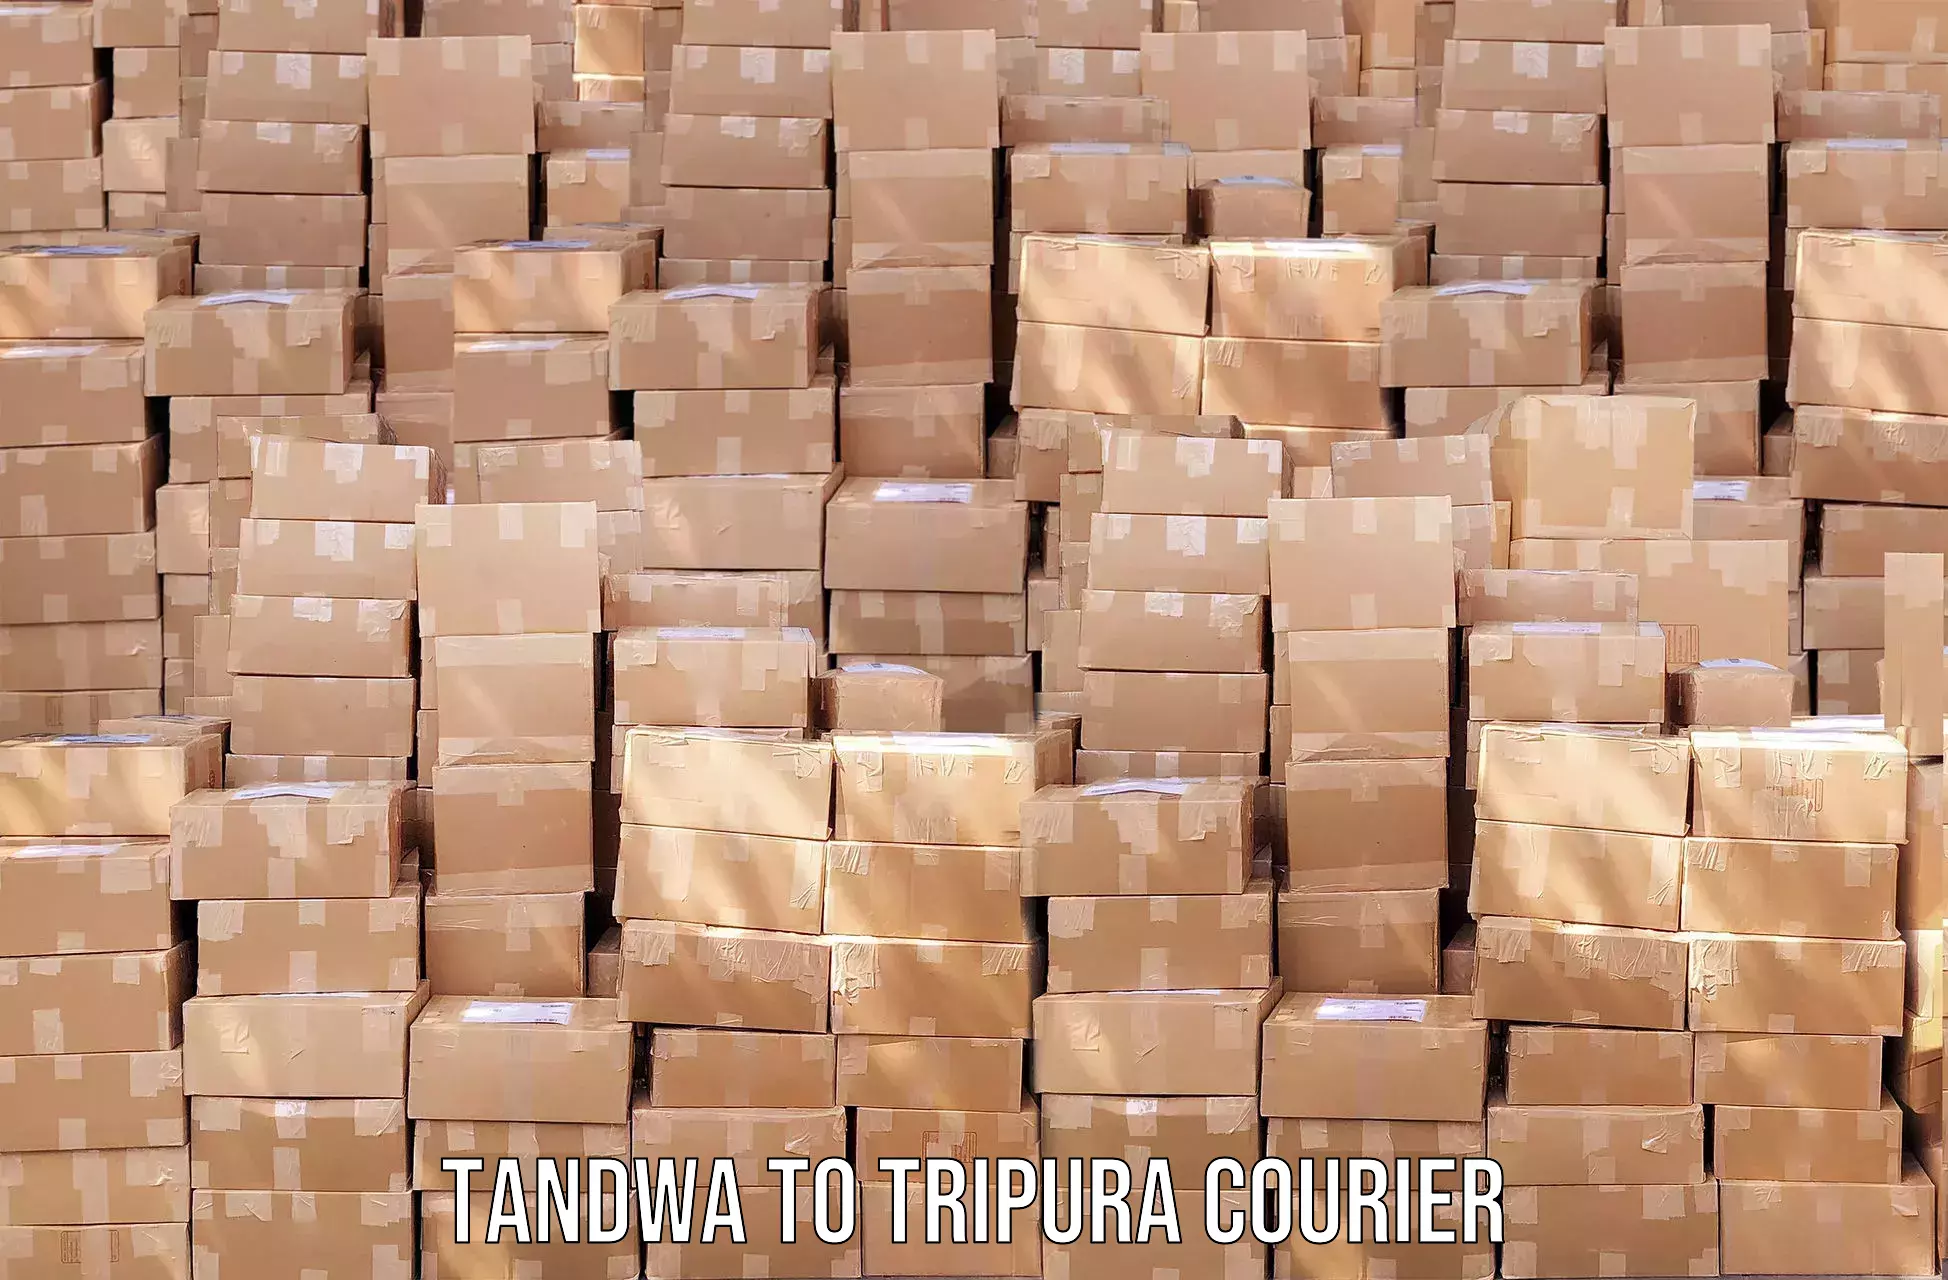 Courier service comparison Tandwa to Aambasa